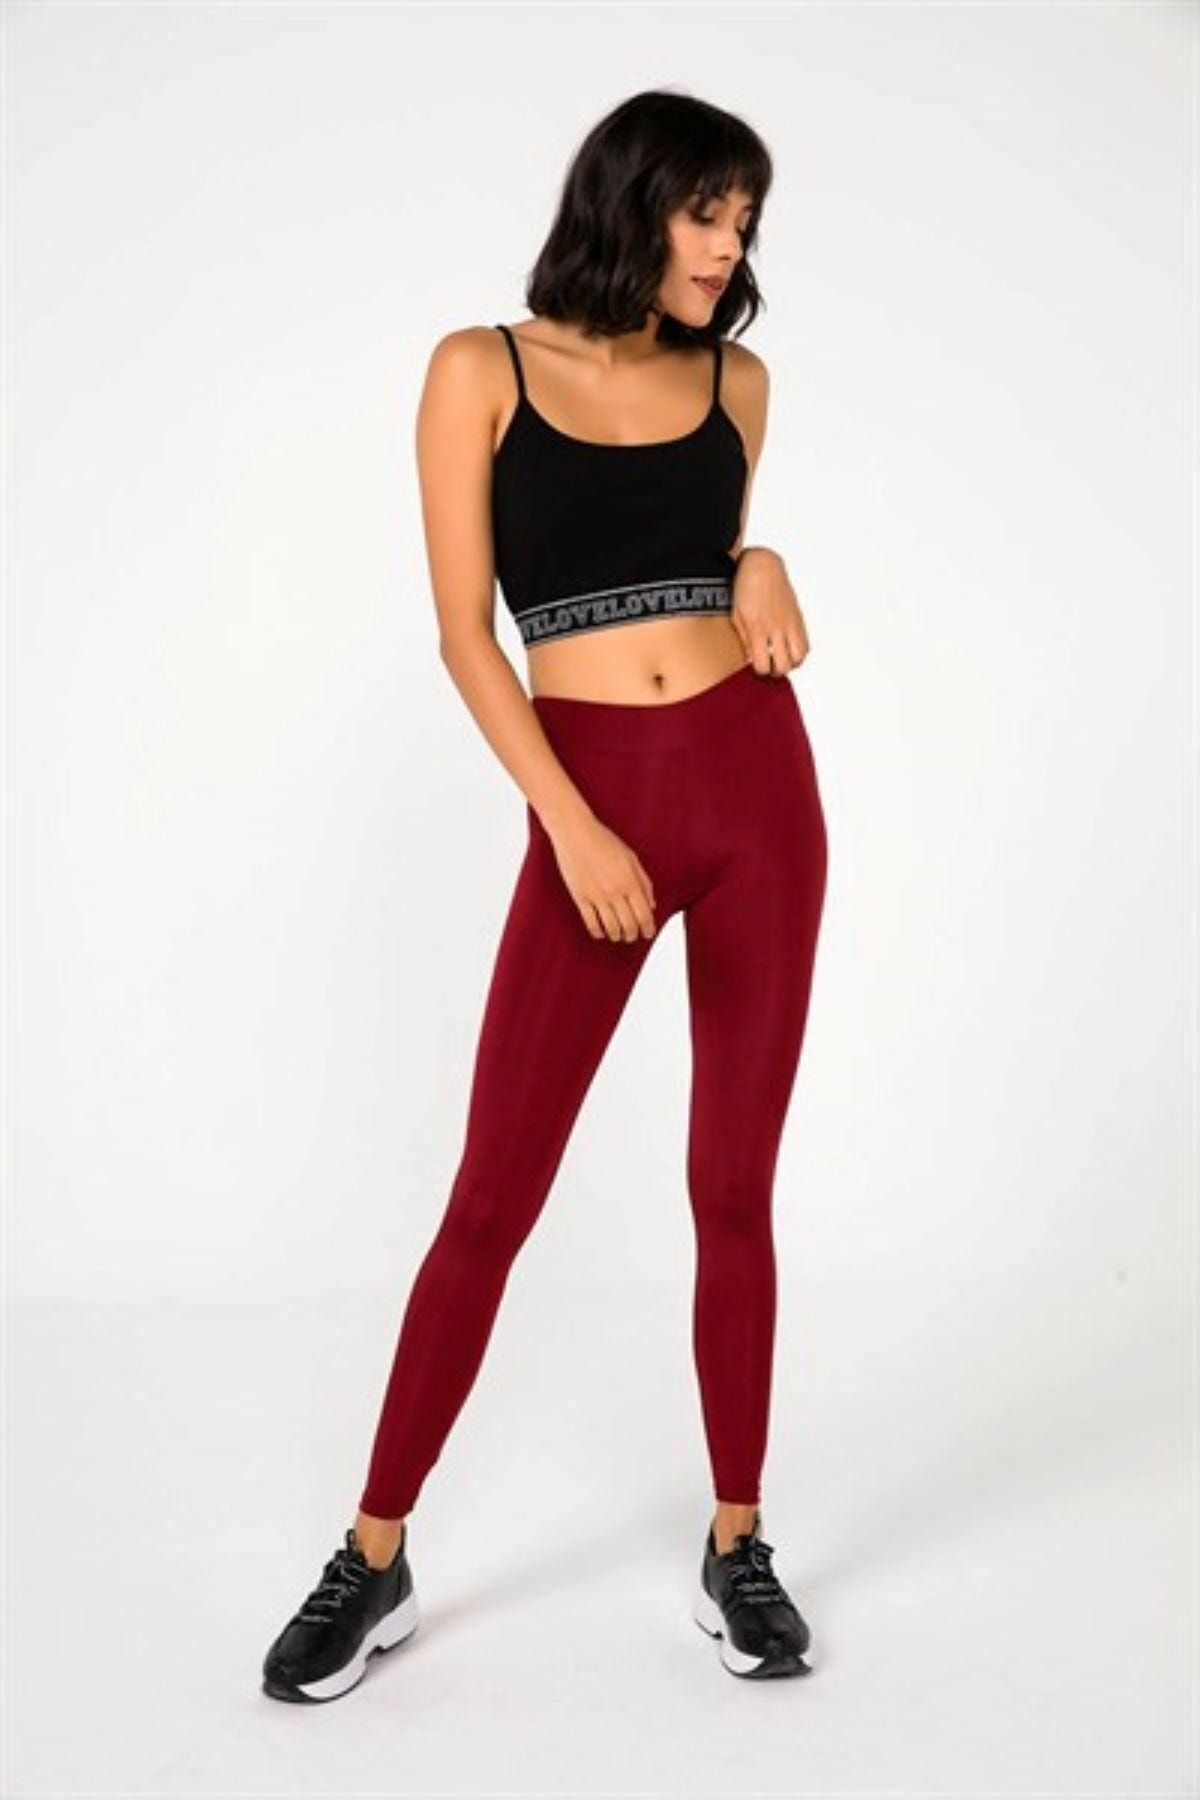 Elle line Women's Burgundy High Waist Daily and Sports Use, Does Not Show  Underwear, Shady Disco Leggings - Trendyol